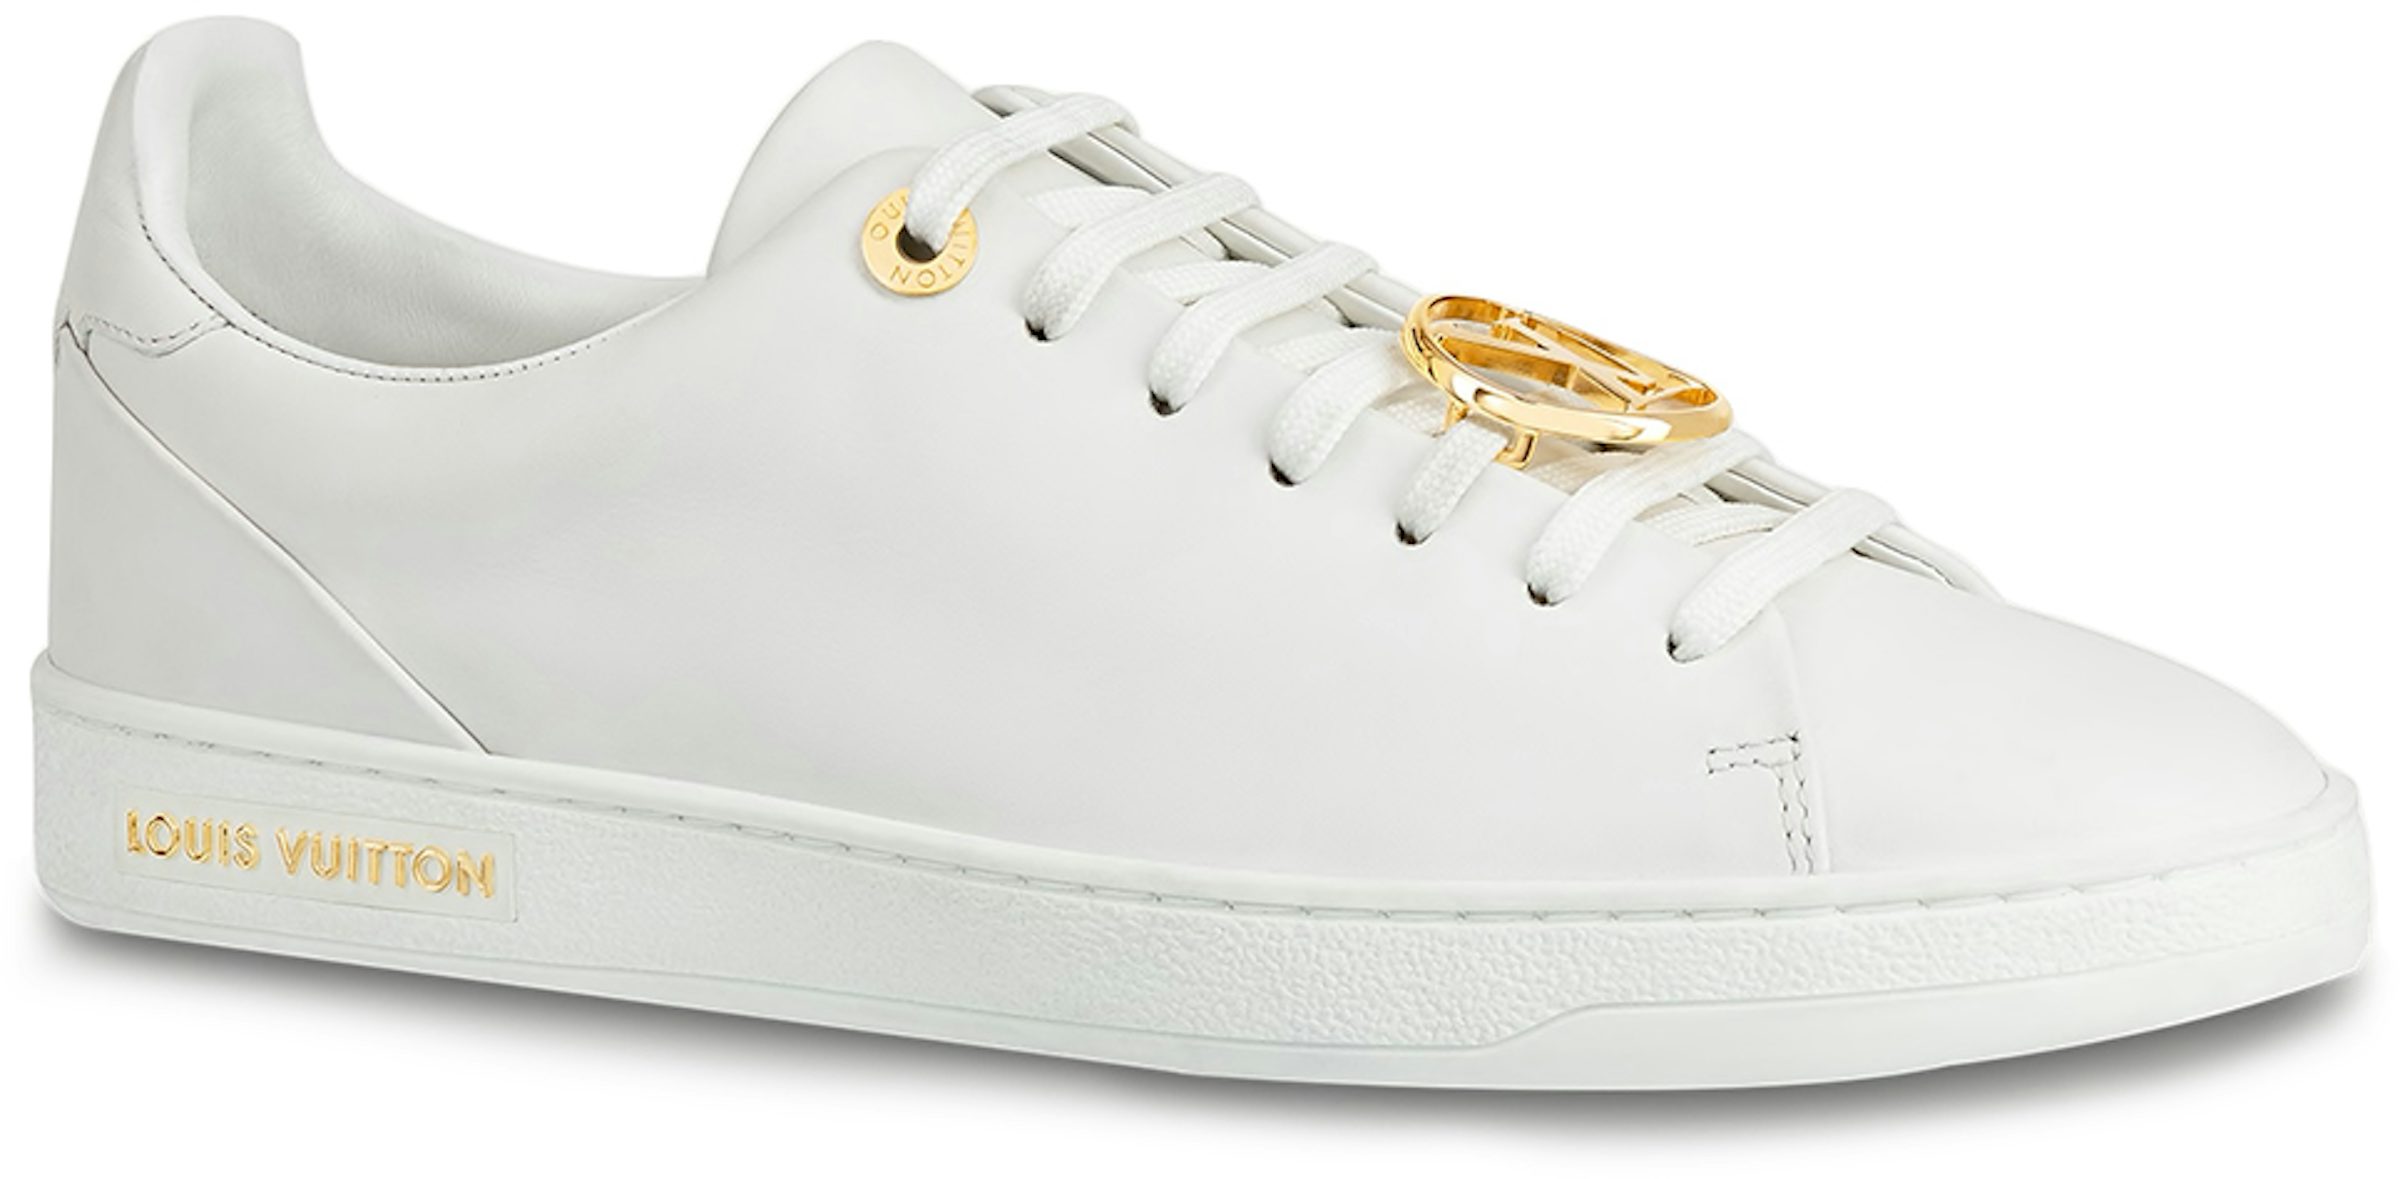 Louis Vuitton LV Skate Leather Yellow Low Top Sneakers - Sneak in